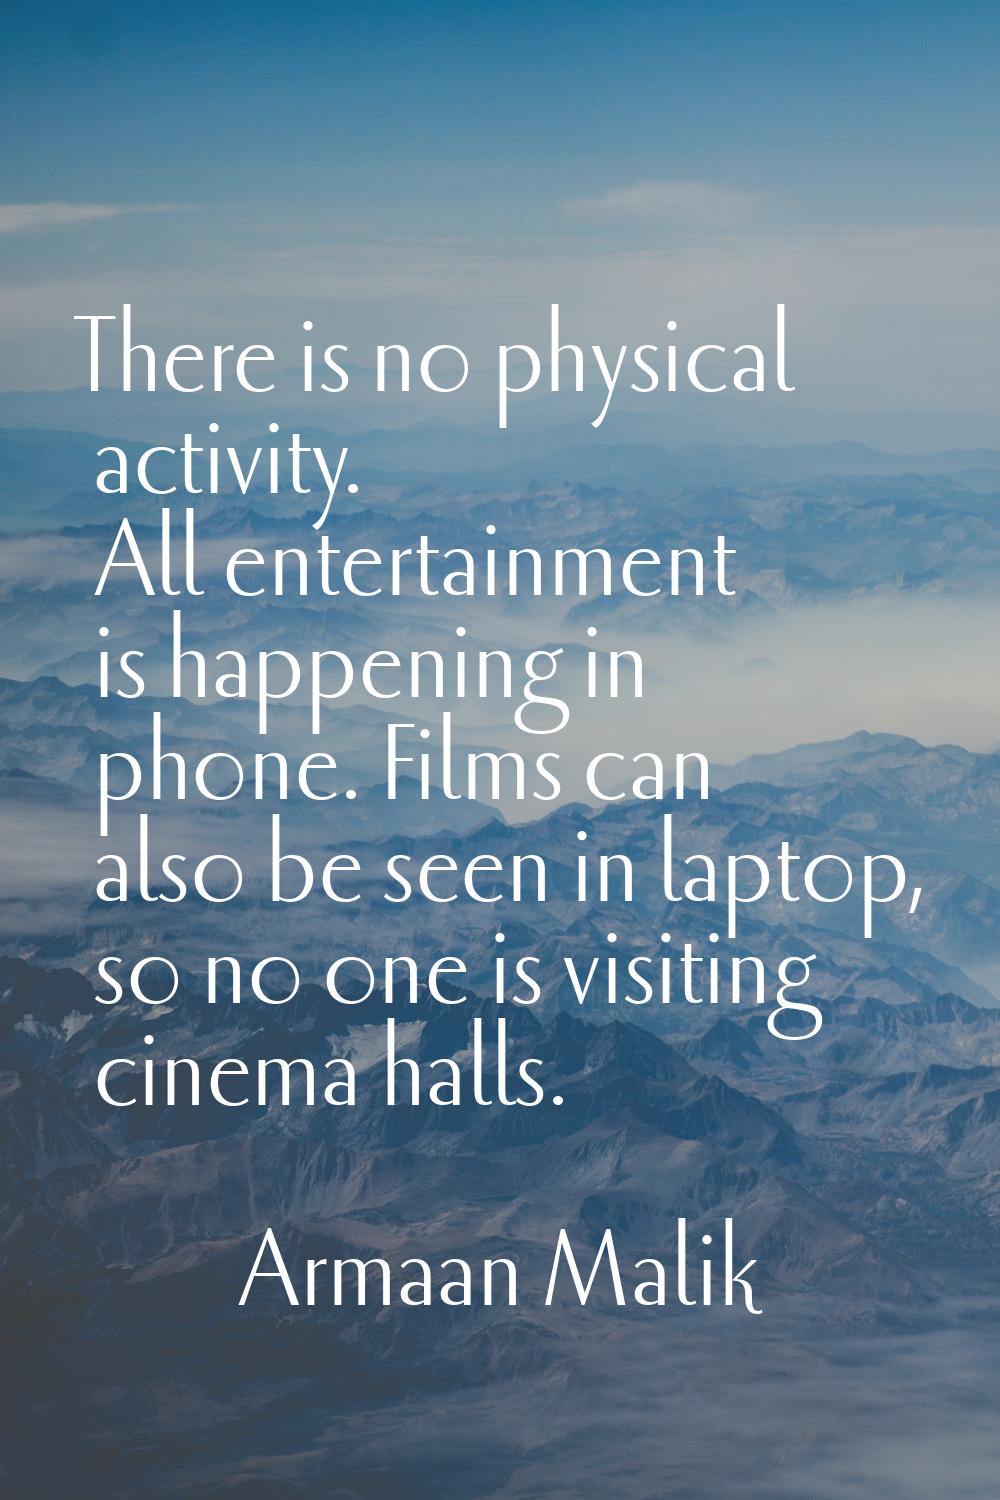 There is no physical activity. All entertainment is happening in phone. Films can also be seen in l